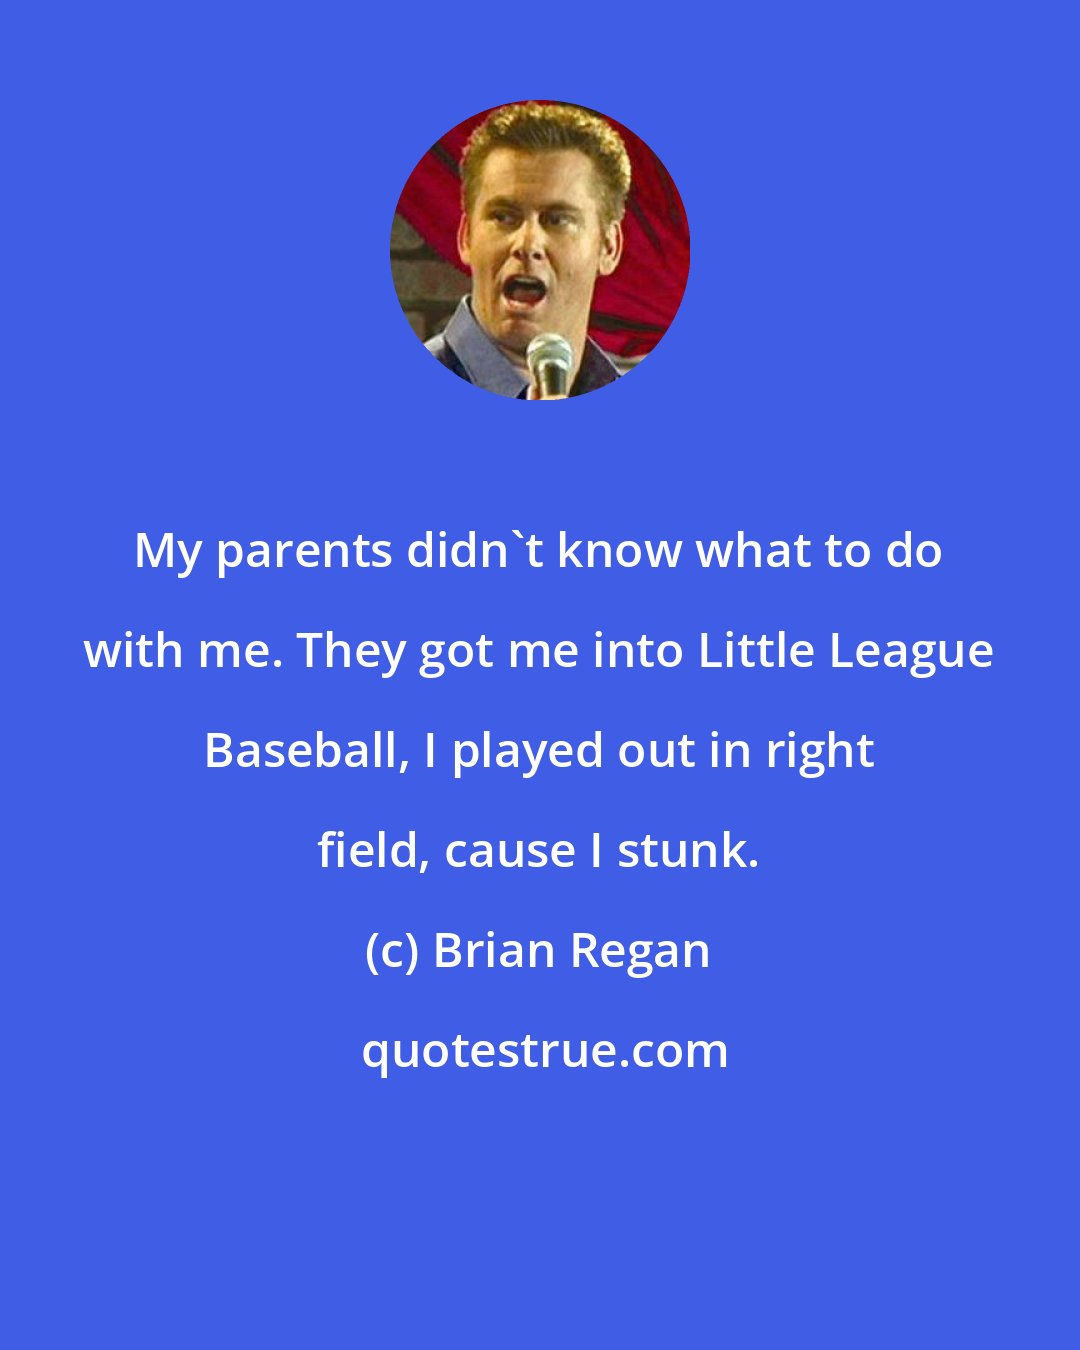 Brian Regan: My parents didn't know what to do with me. They got me into Little League Baseball, I played out in right field, cause I stunk.